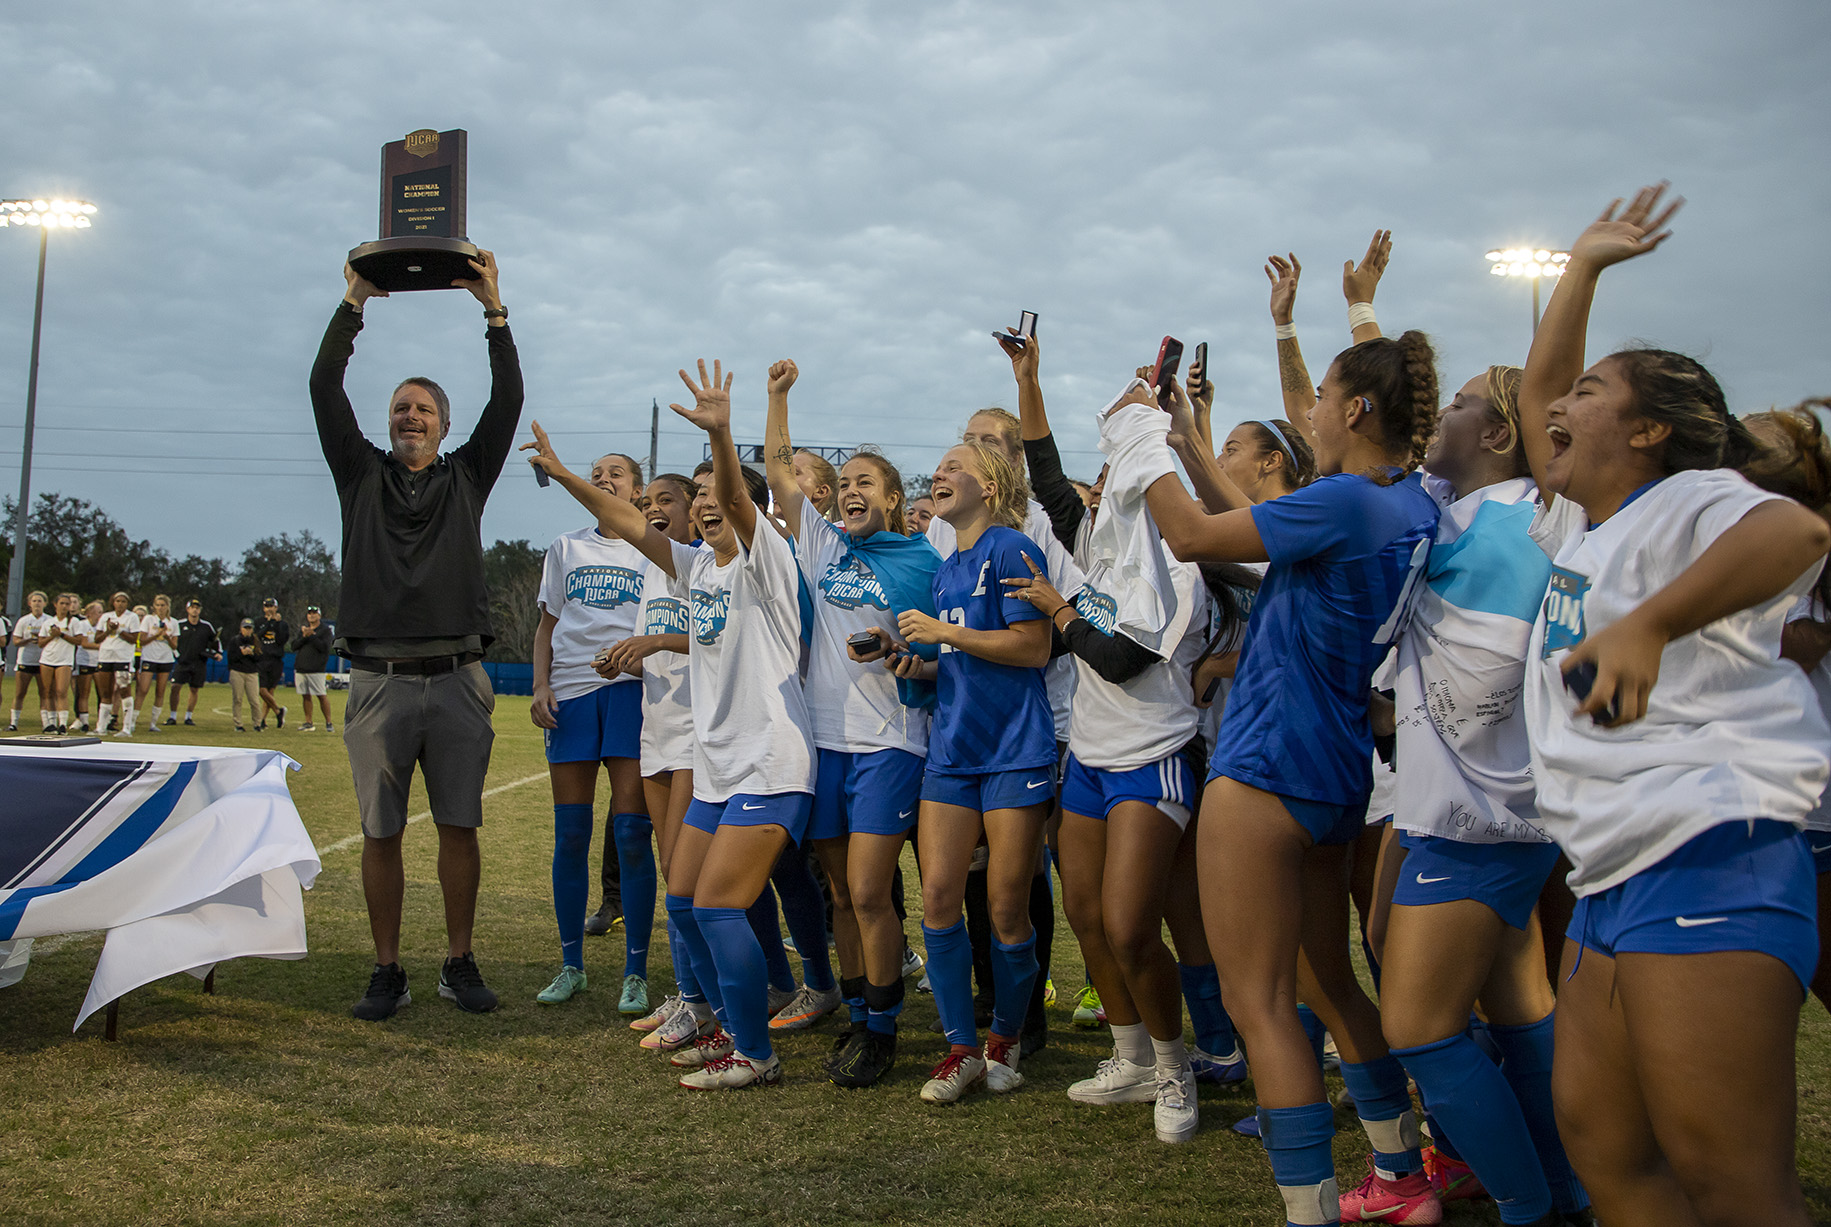 Women's soccer team blanks Tyler to win first national title